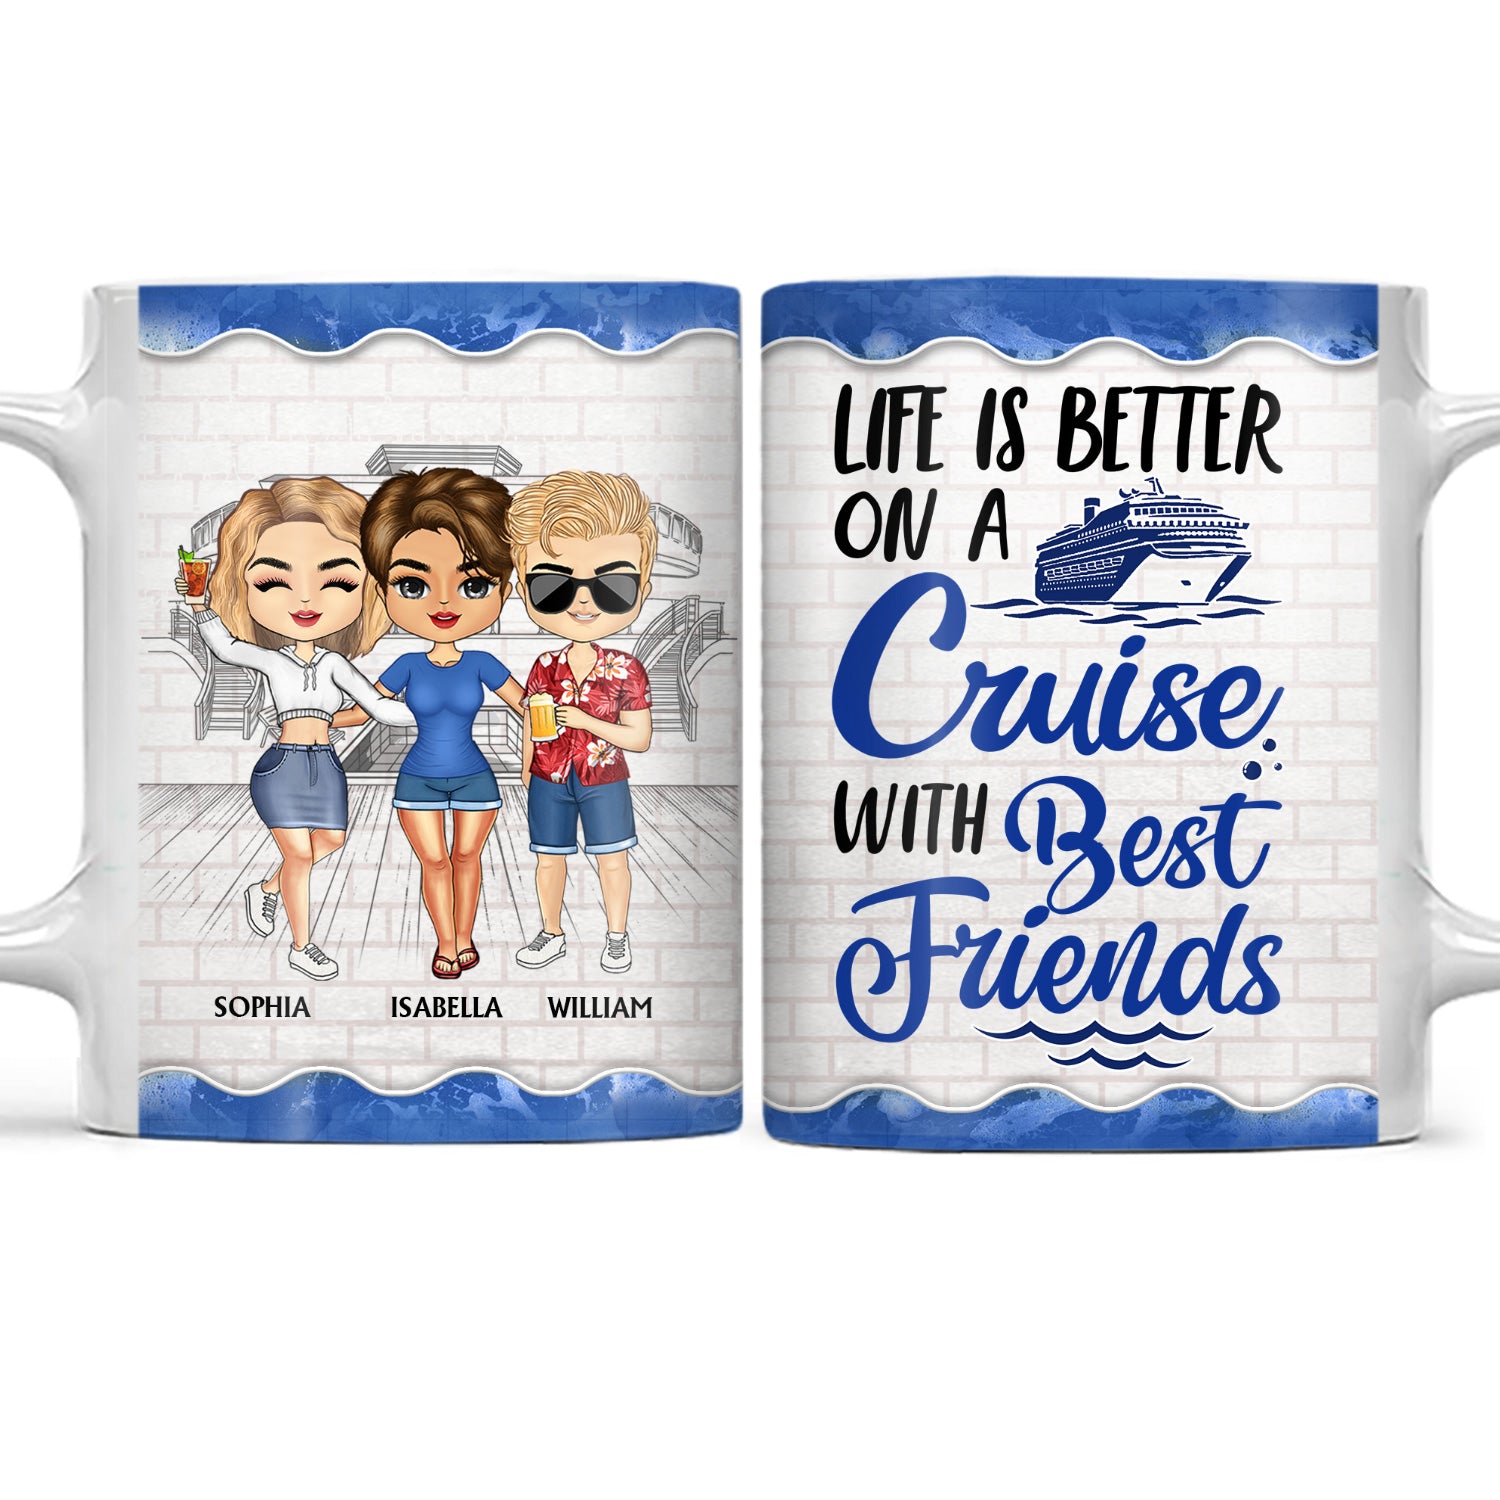 Life Is Better On A Cruise With Best Friends - Birthday, Traveling, Cruising Gift For BFF, Siblings, Colleagues - Personalized Custom White Edge-to-Edge Mug